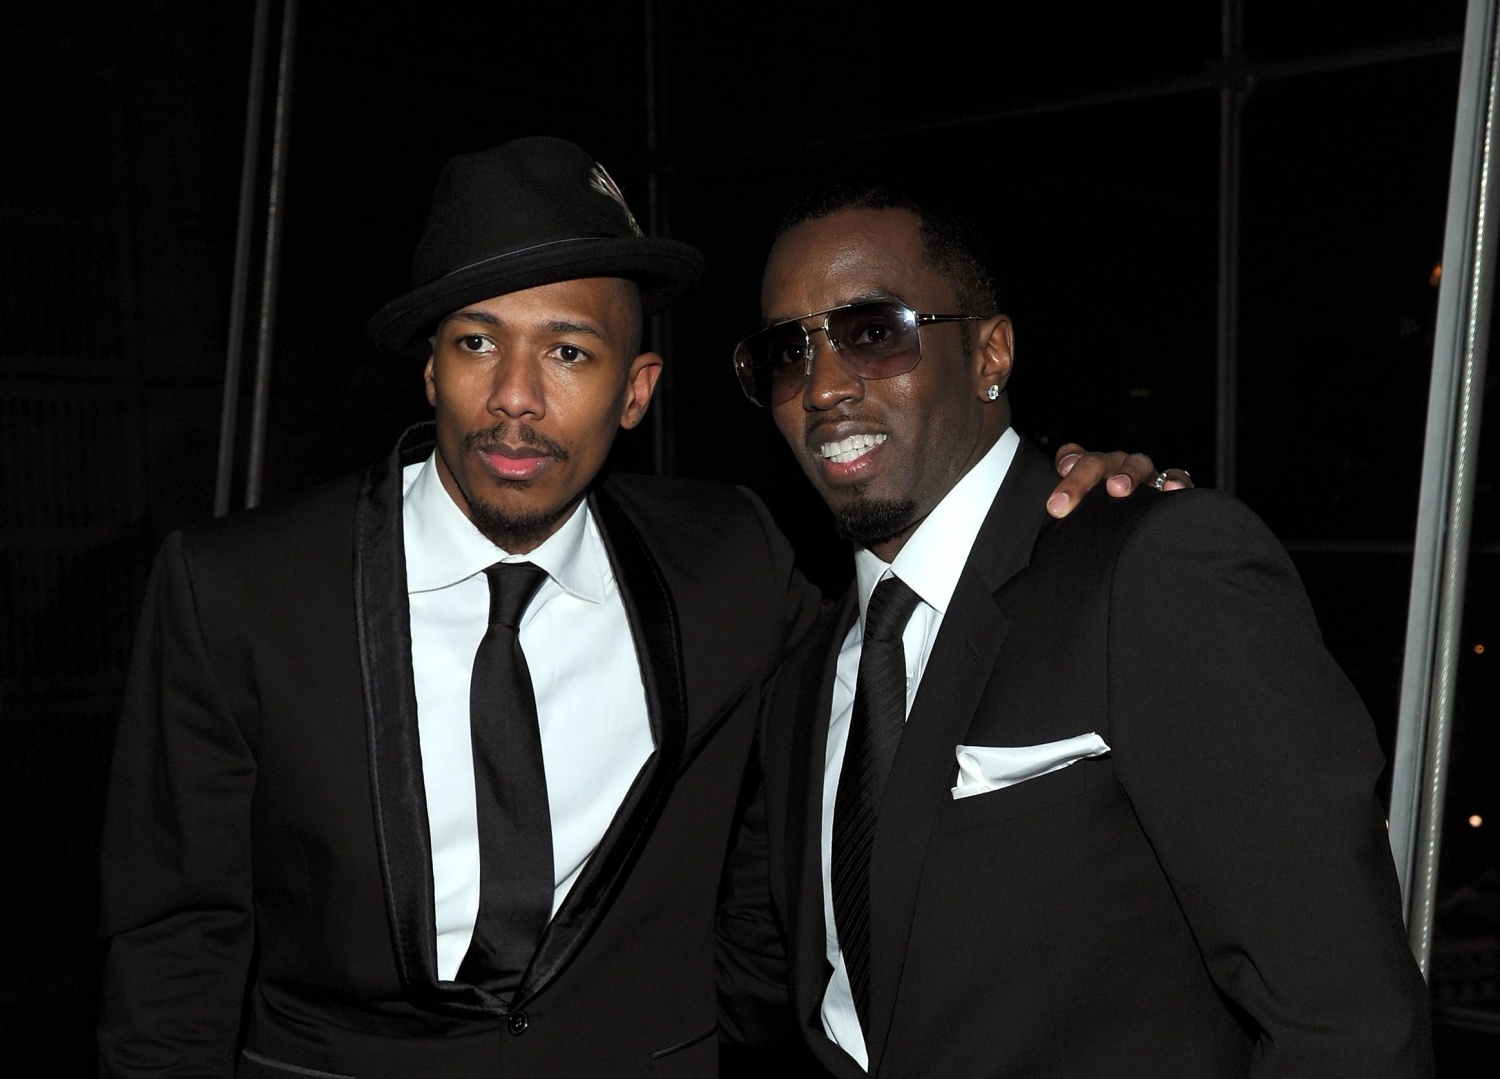 Nick Cannon (L) and Sean "Diddy" Combs